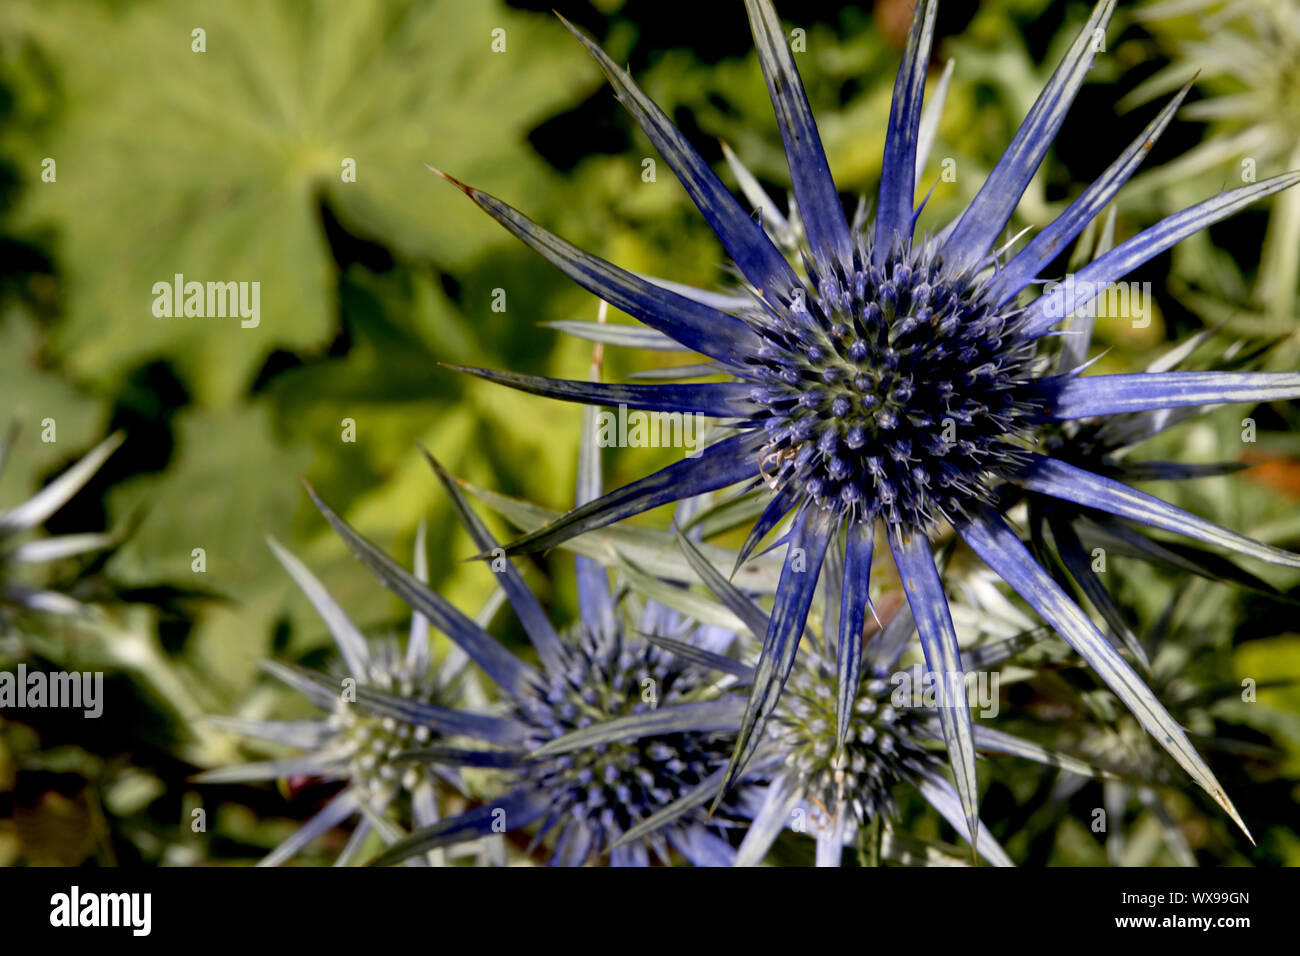 A beautiful blue thistle flower found in Monet's Garden, as well as other gardens in the same area of France Stock Photo